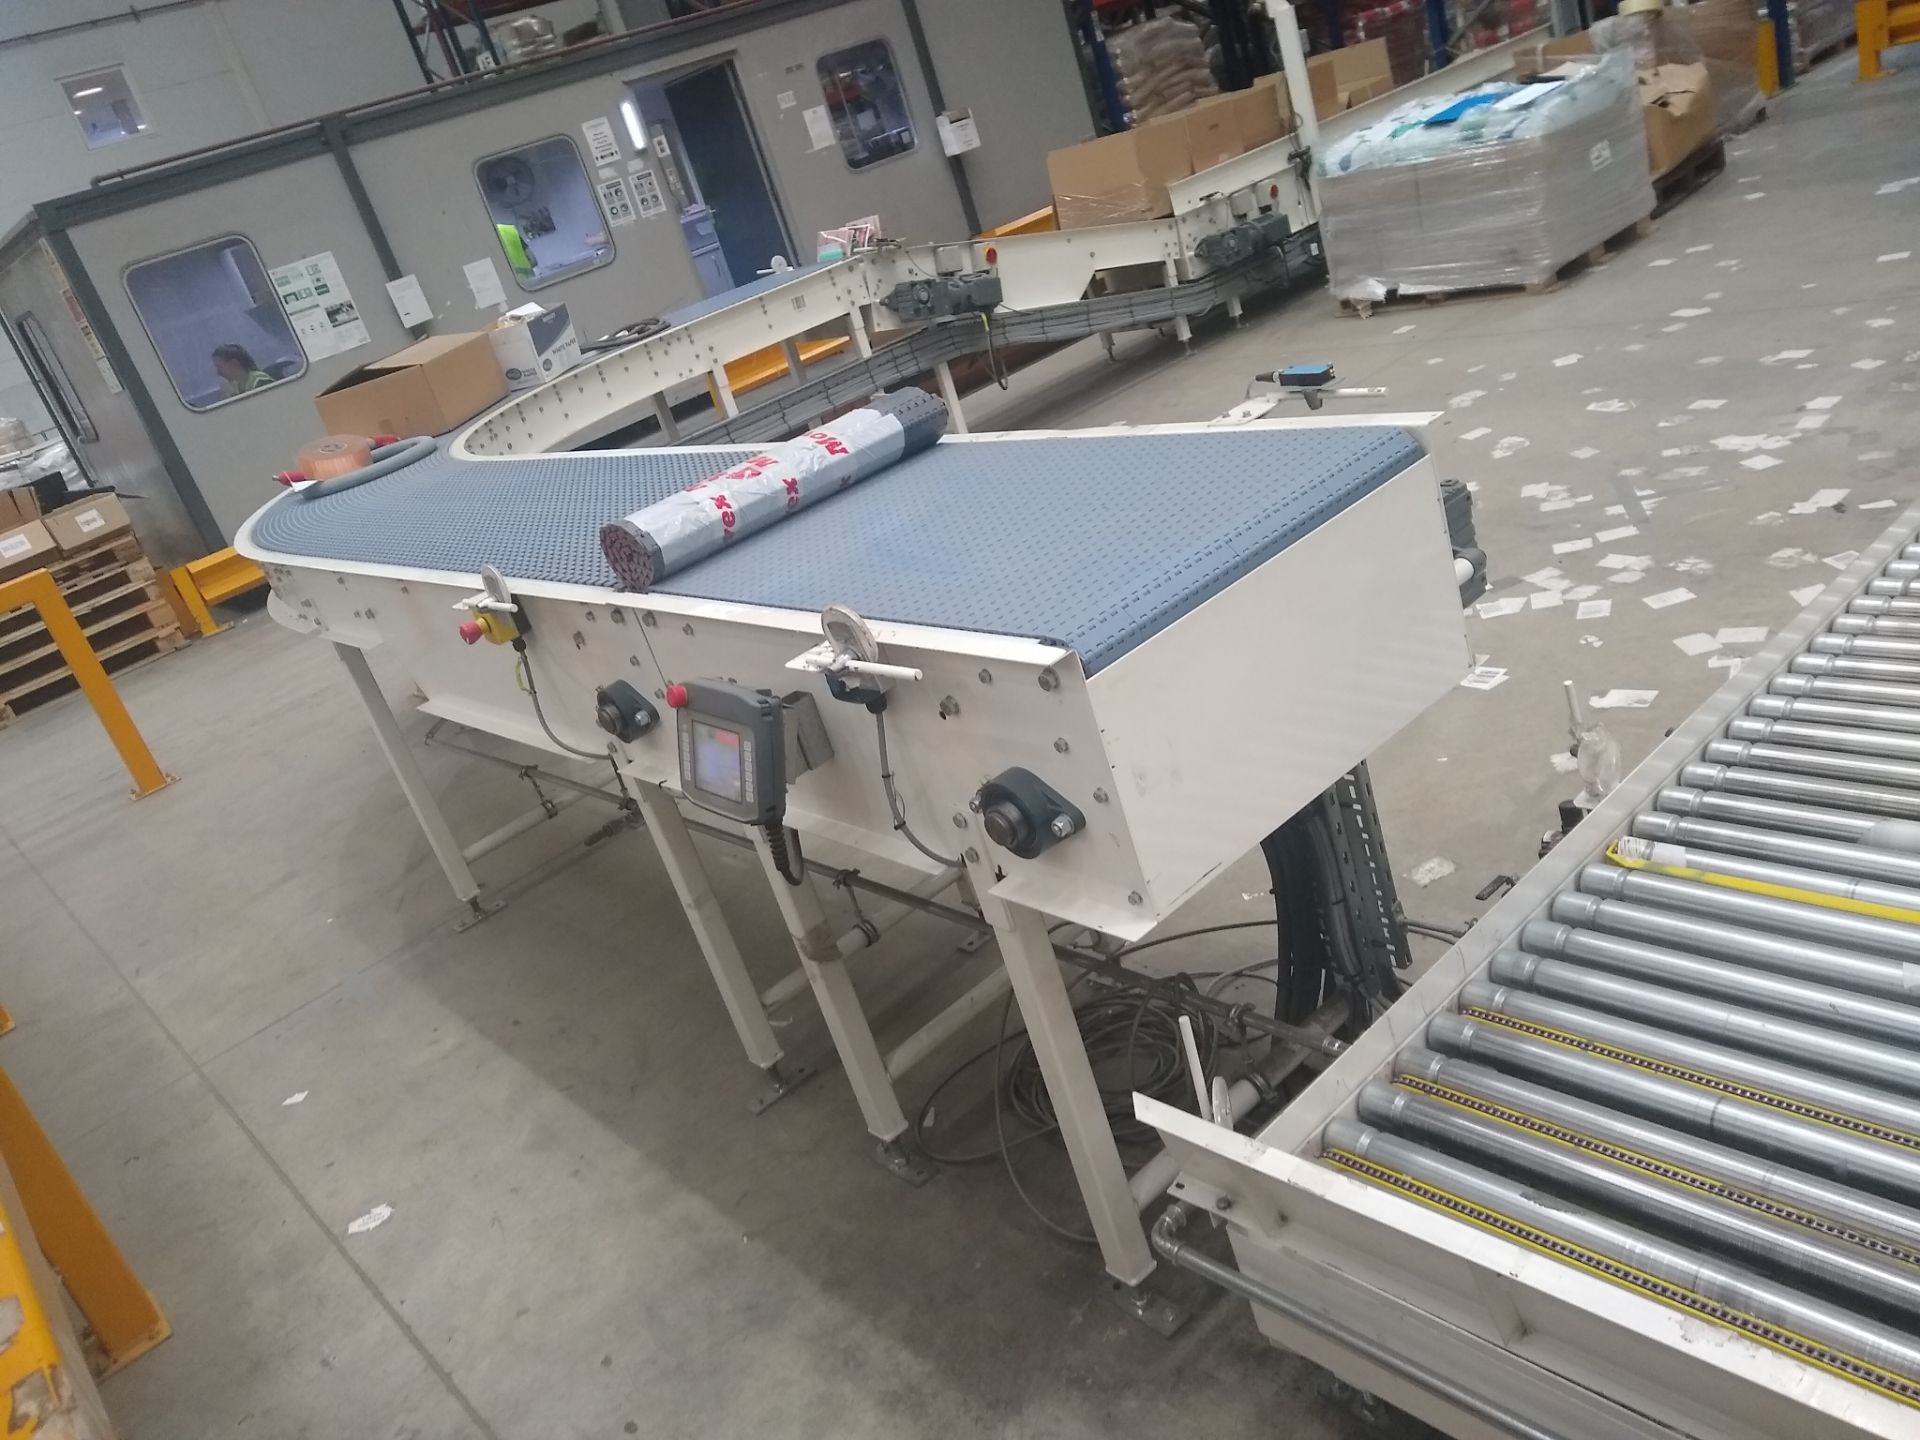 2016 Linkx Case Erector & Closer and Bag to Box Packing Line - Image 49 of 65